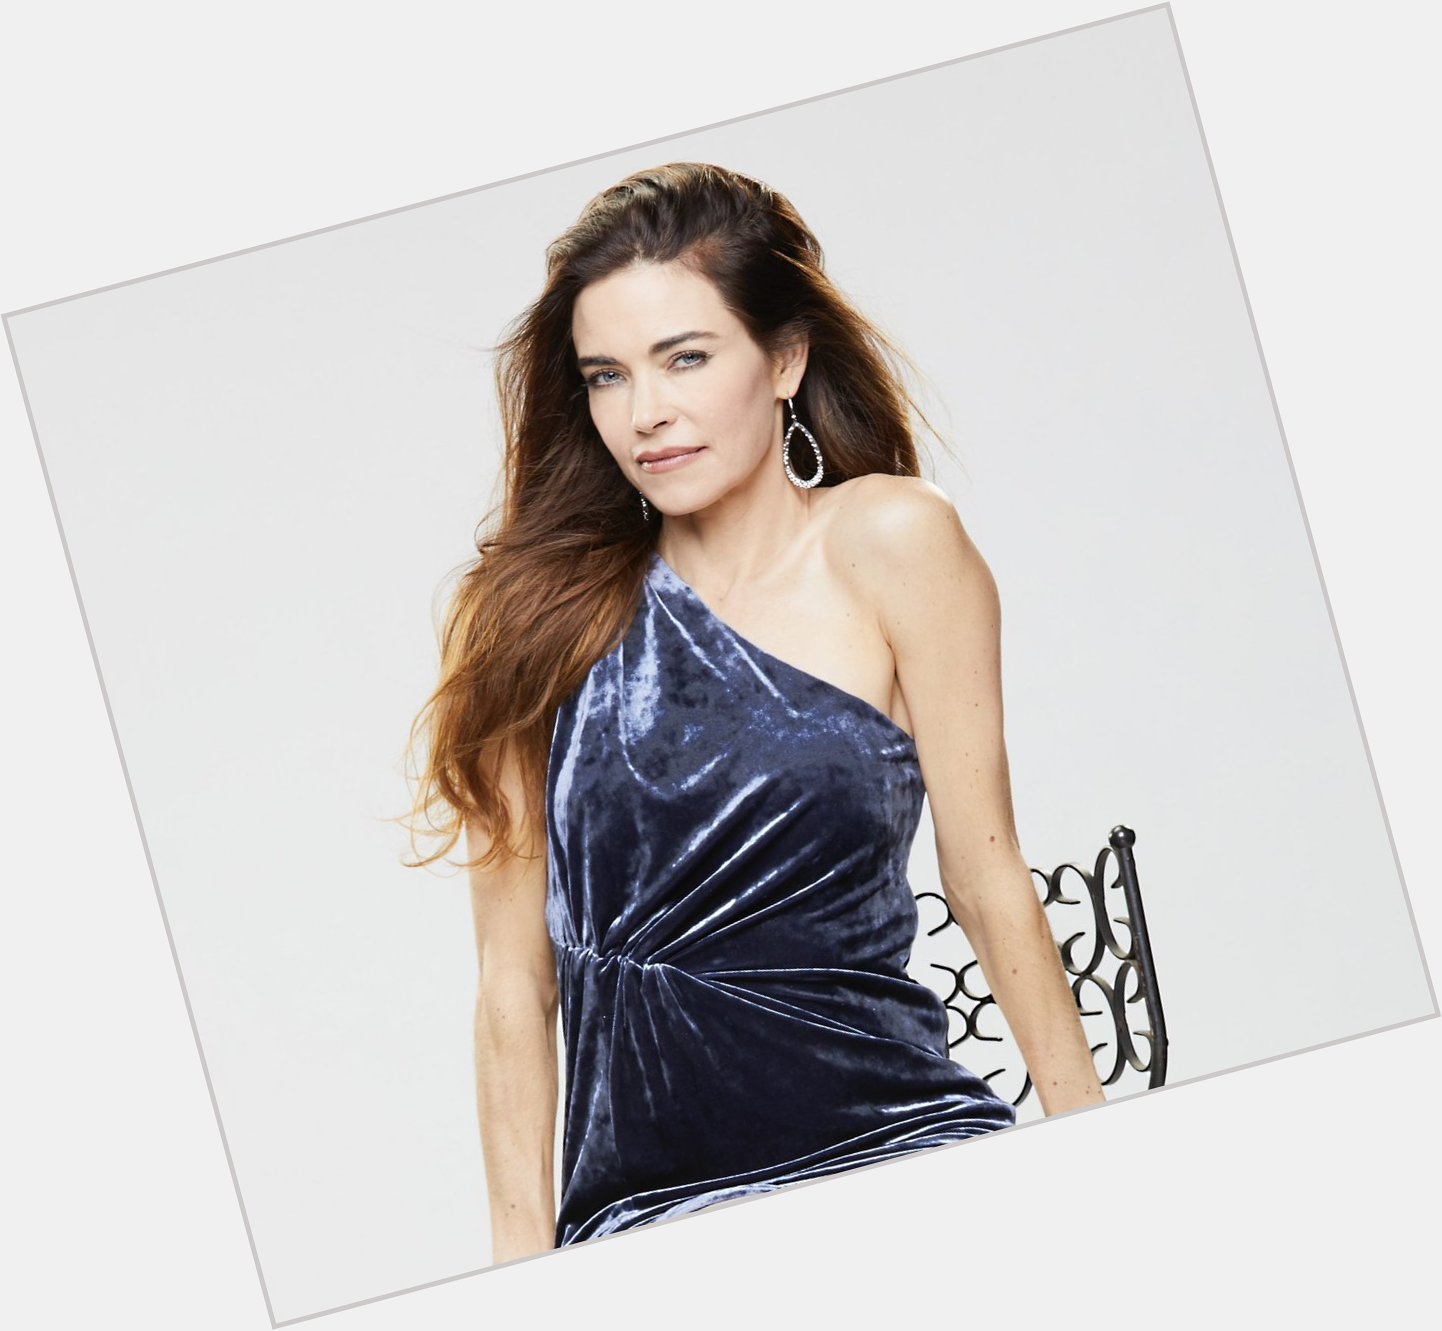 Join us in wishing Amelia Heinle a very Happy Birthday!!    